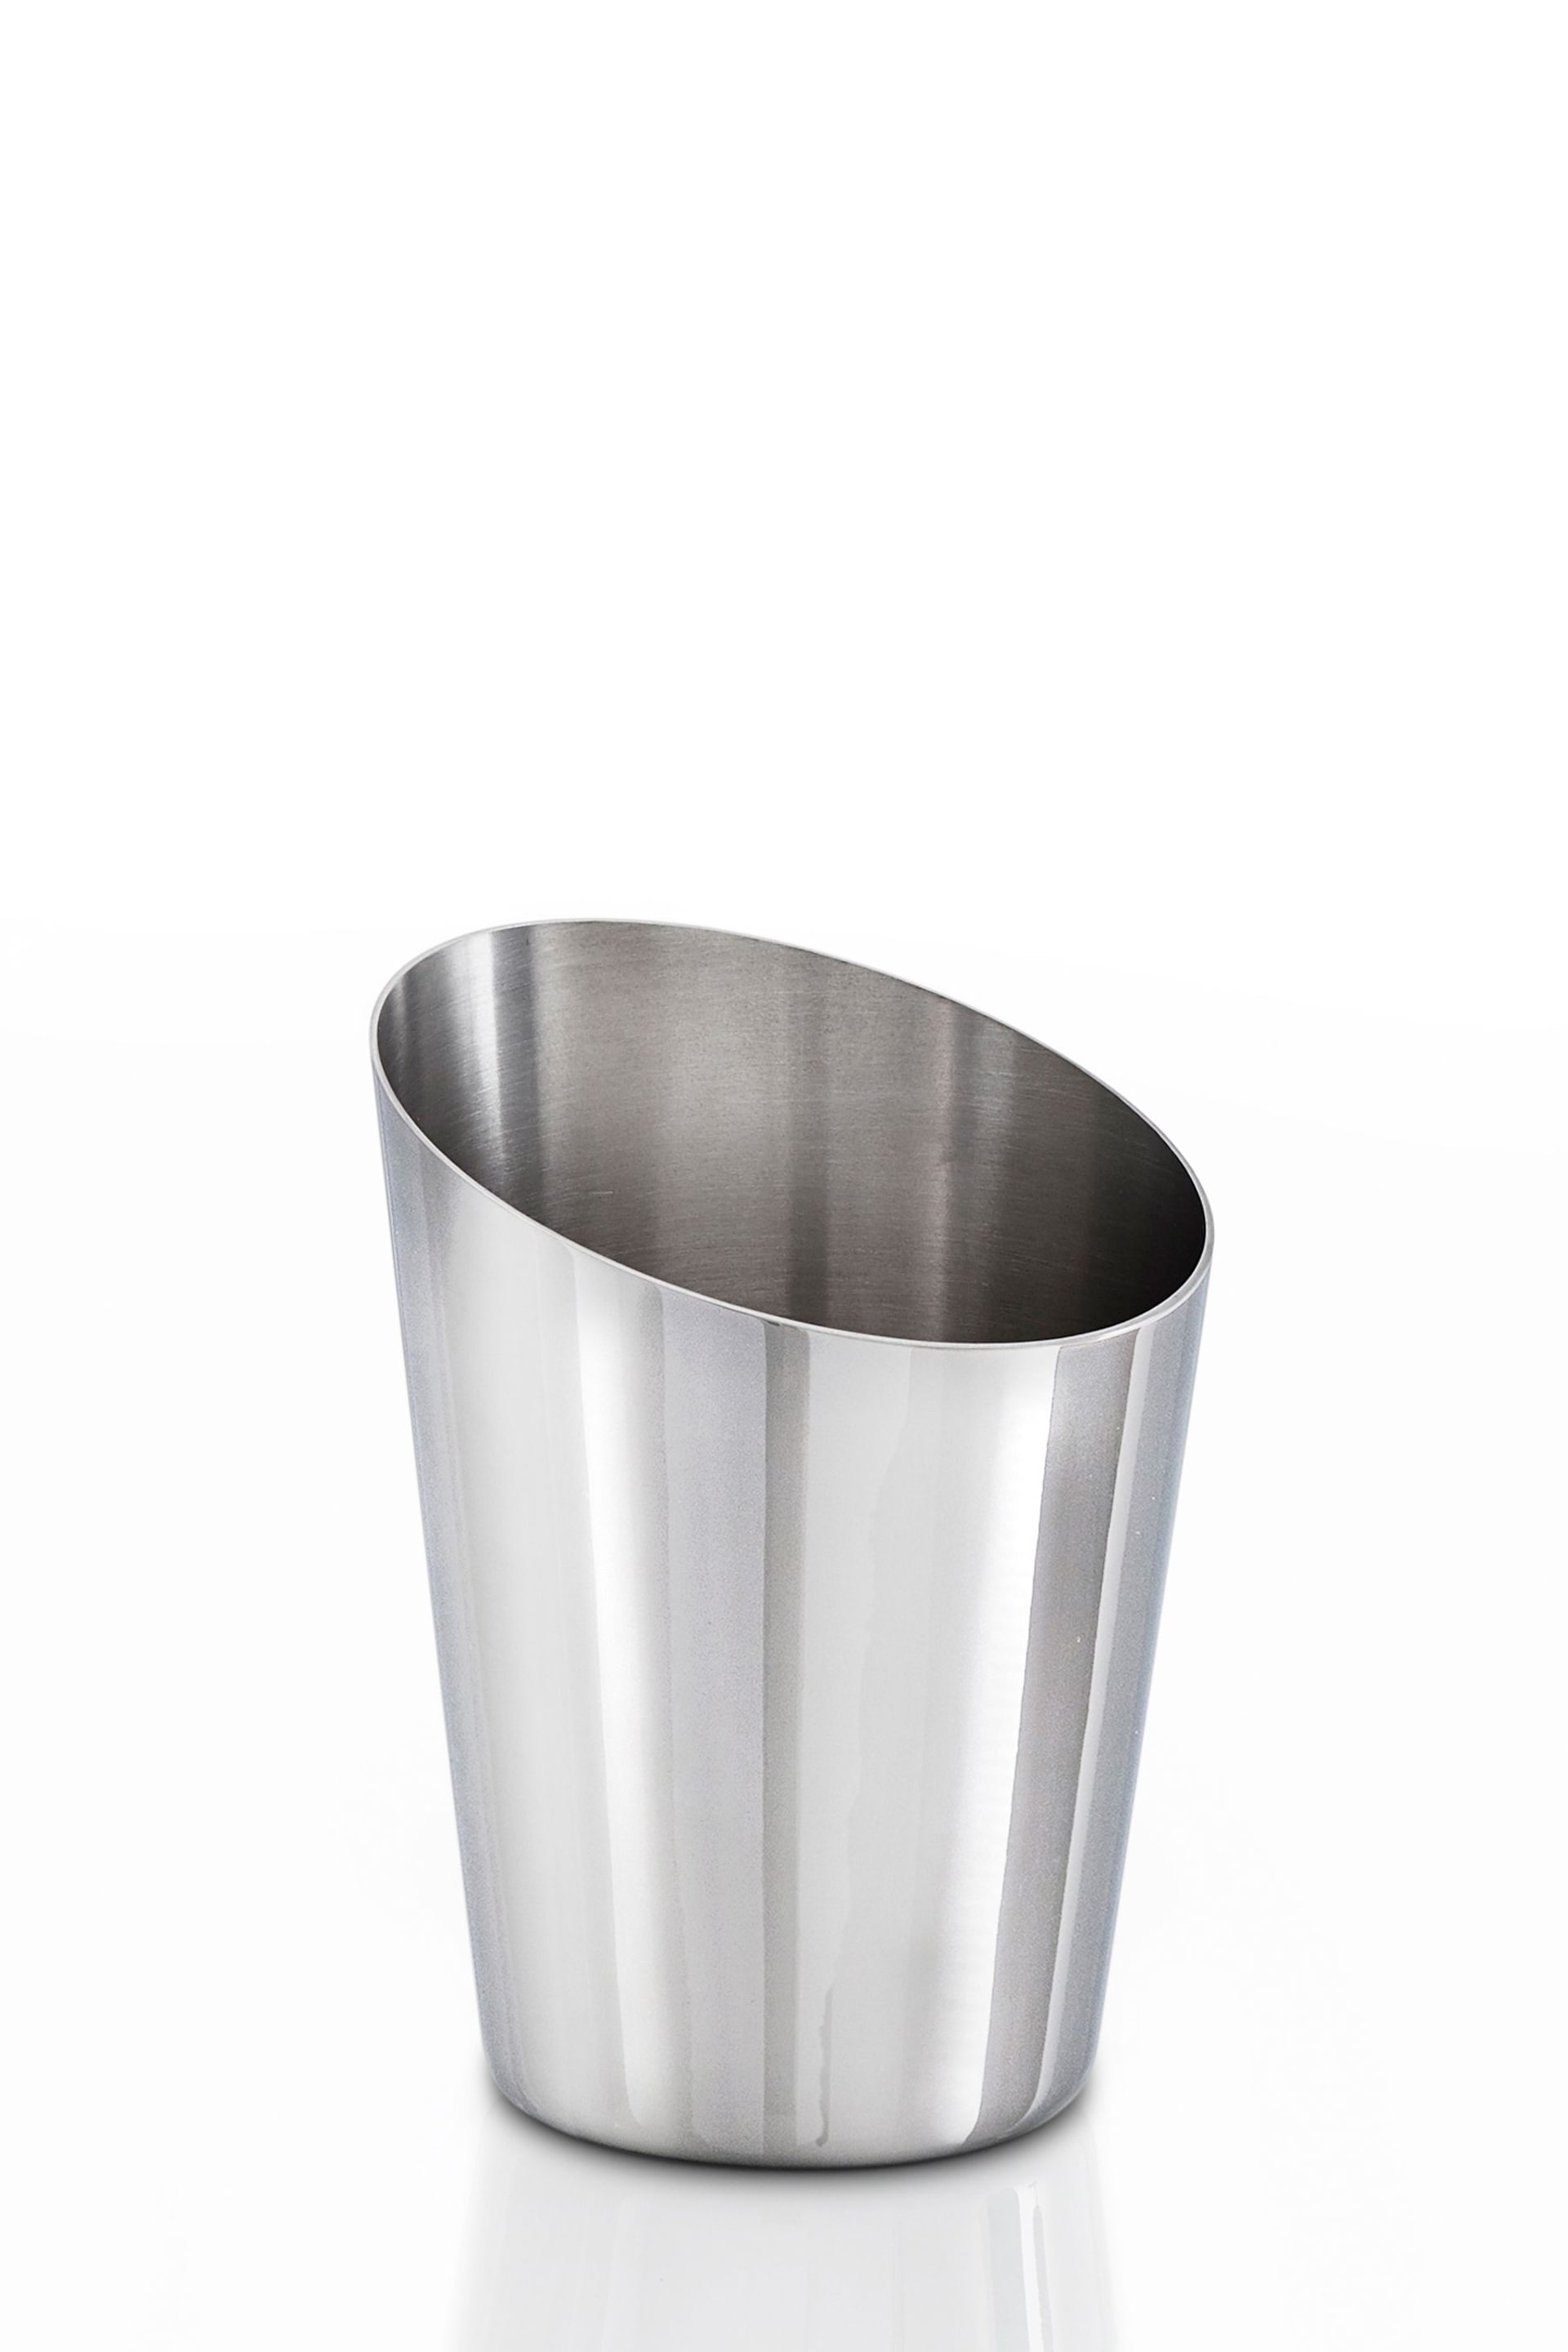 Robert Welch Silver Oblique Tumbler - Image 3 of 4